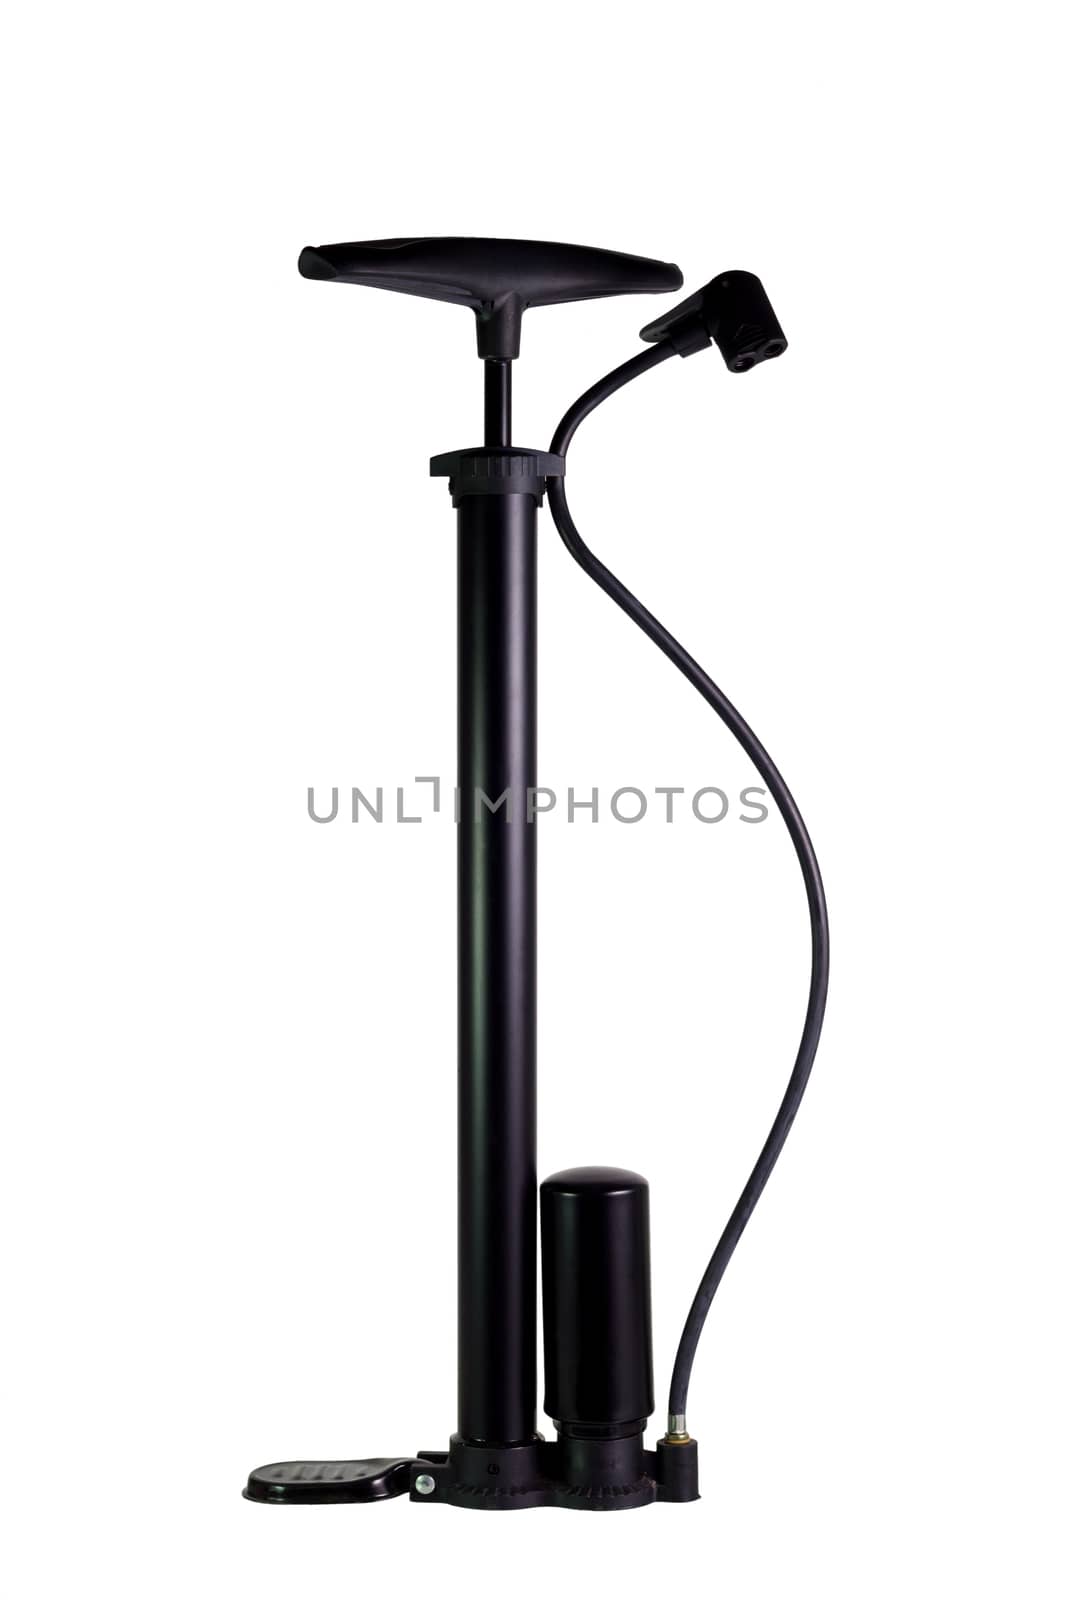 Black Bicycle Tire Inflator Air Pump on isolate background